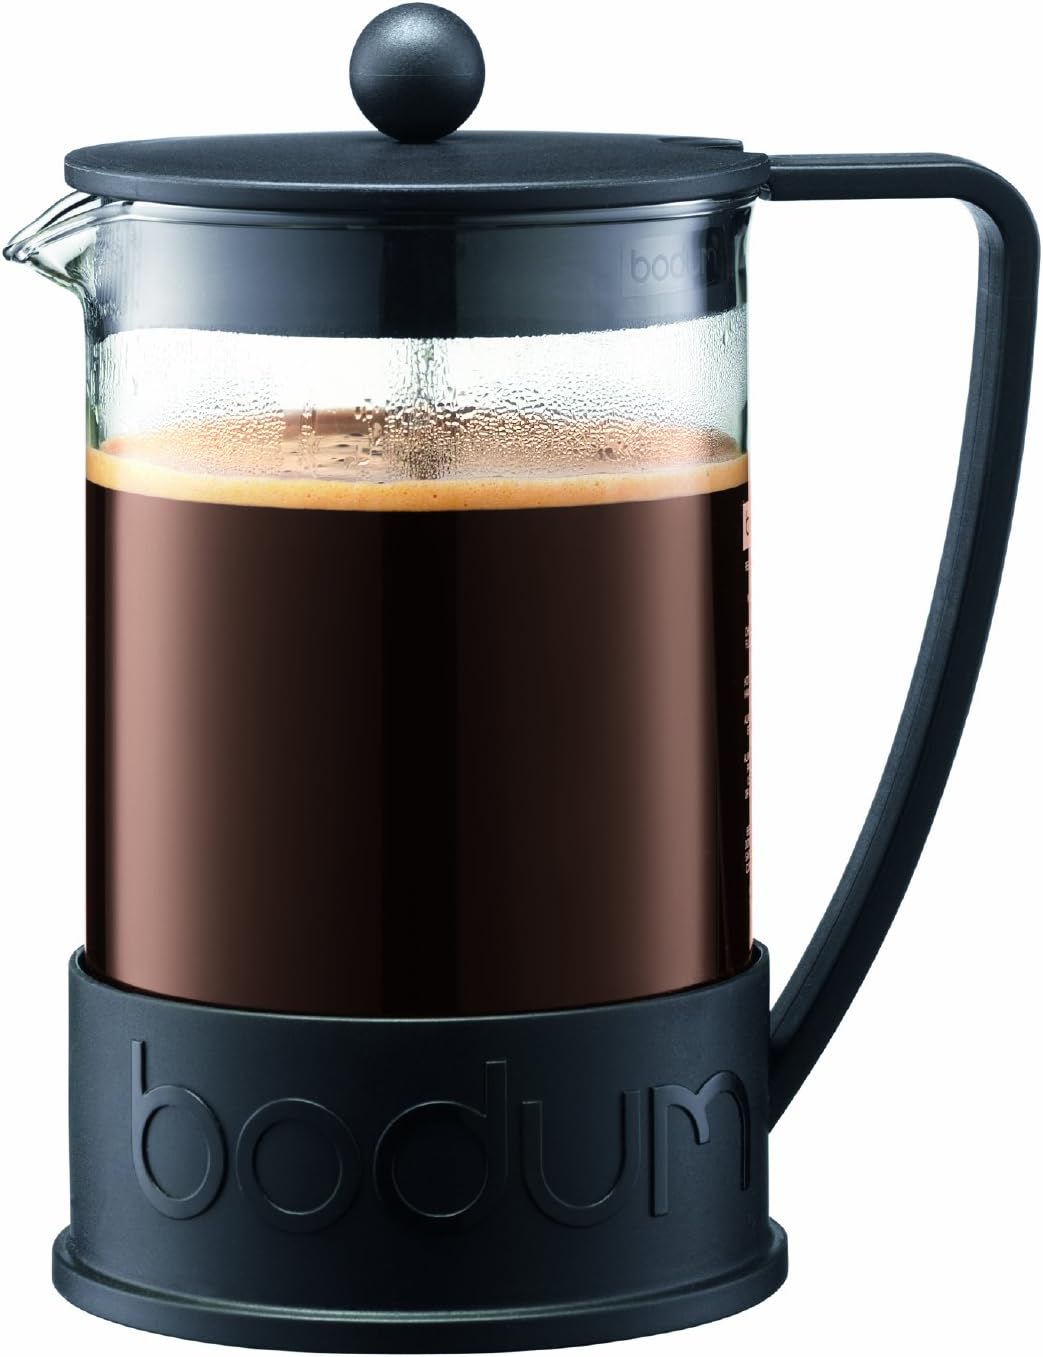 A French press coffee maker.